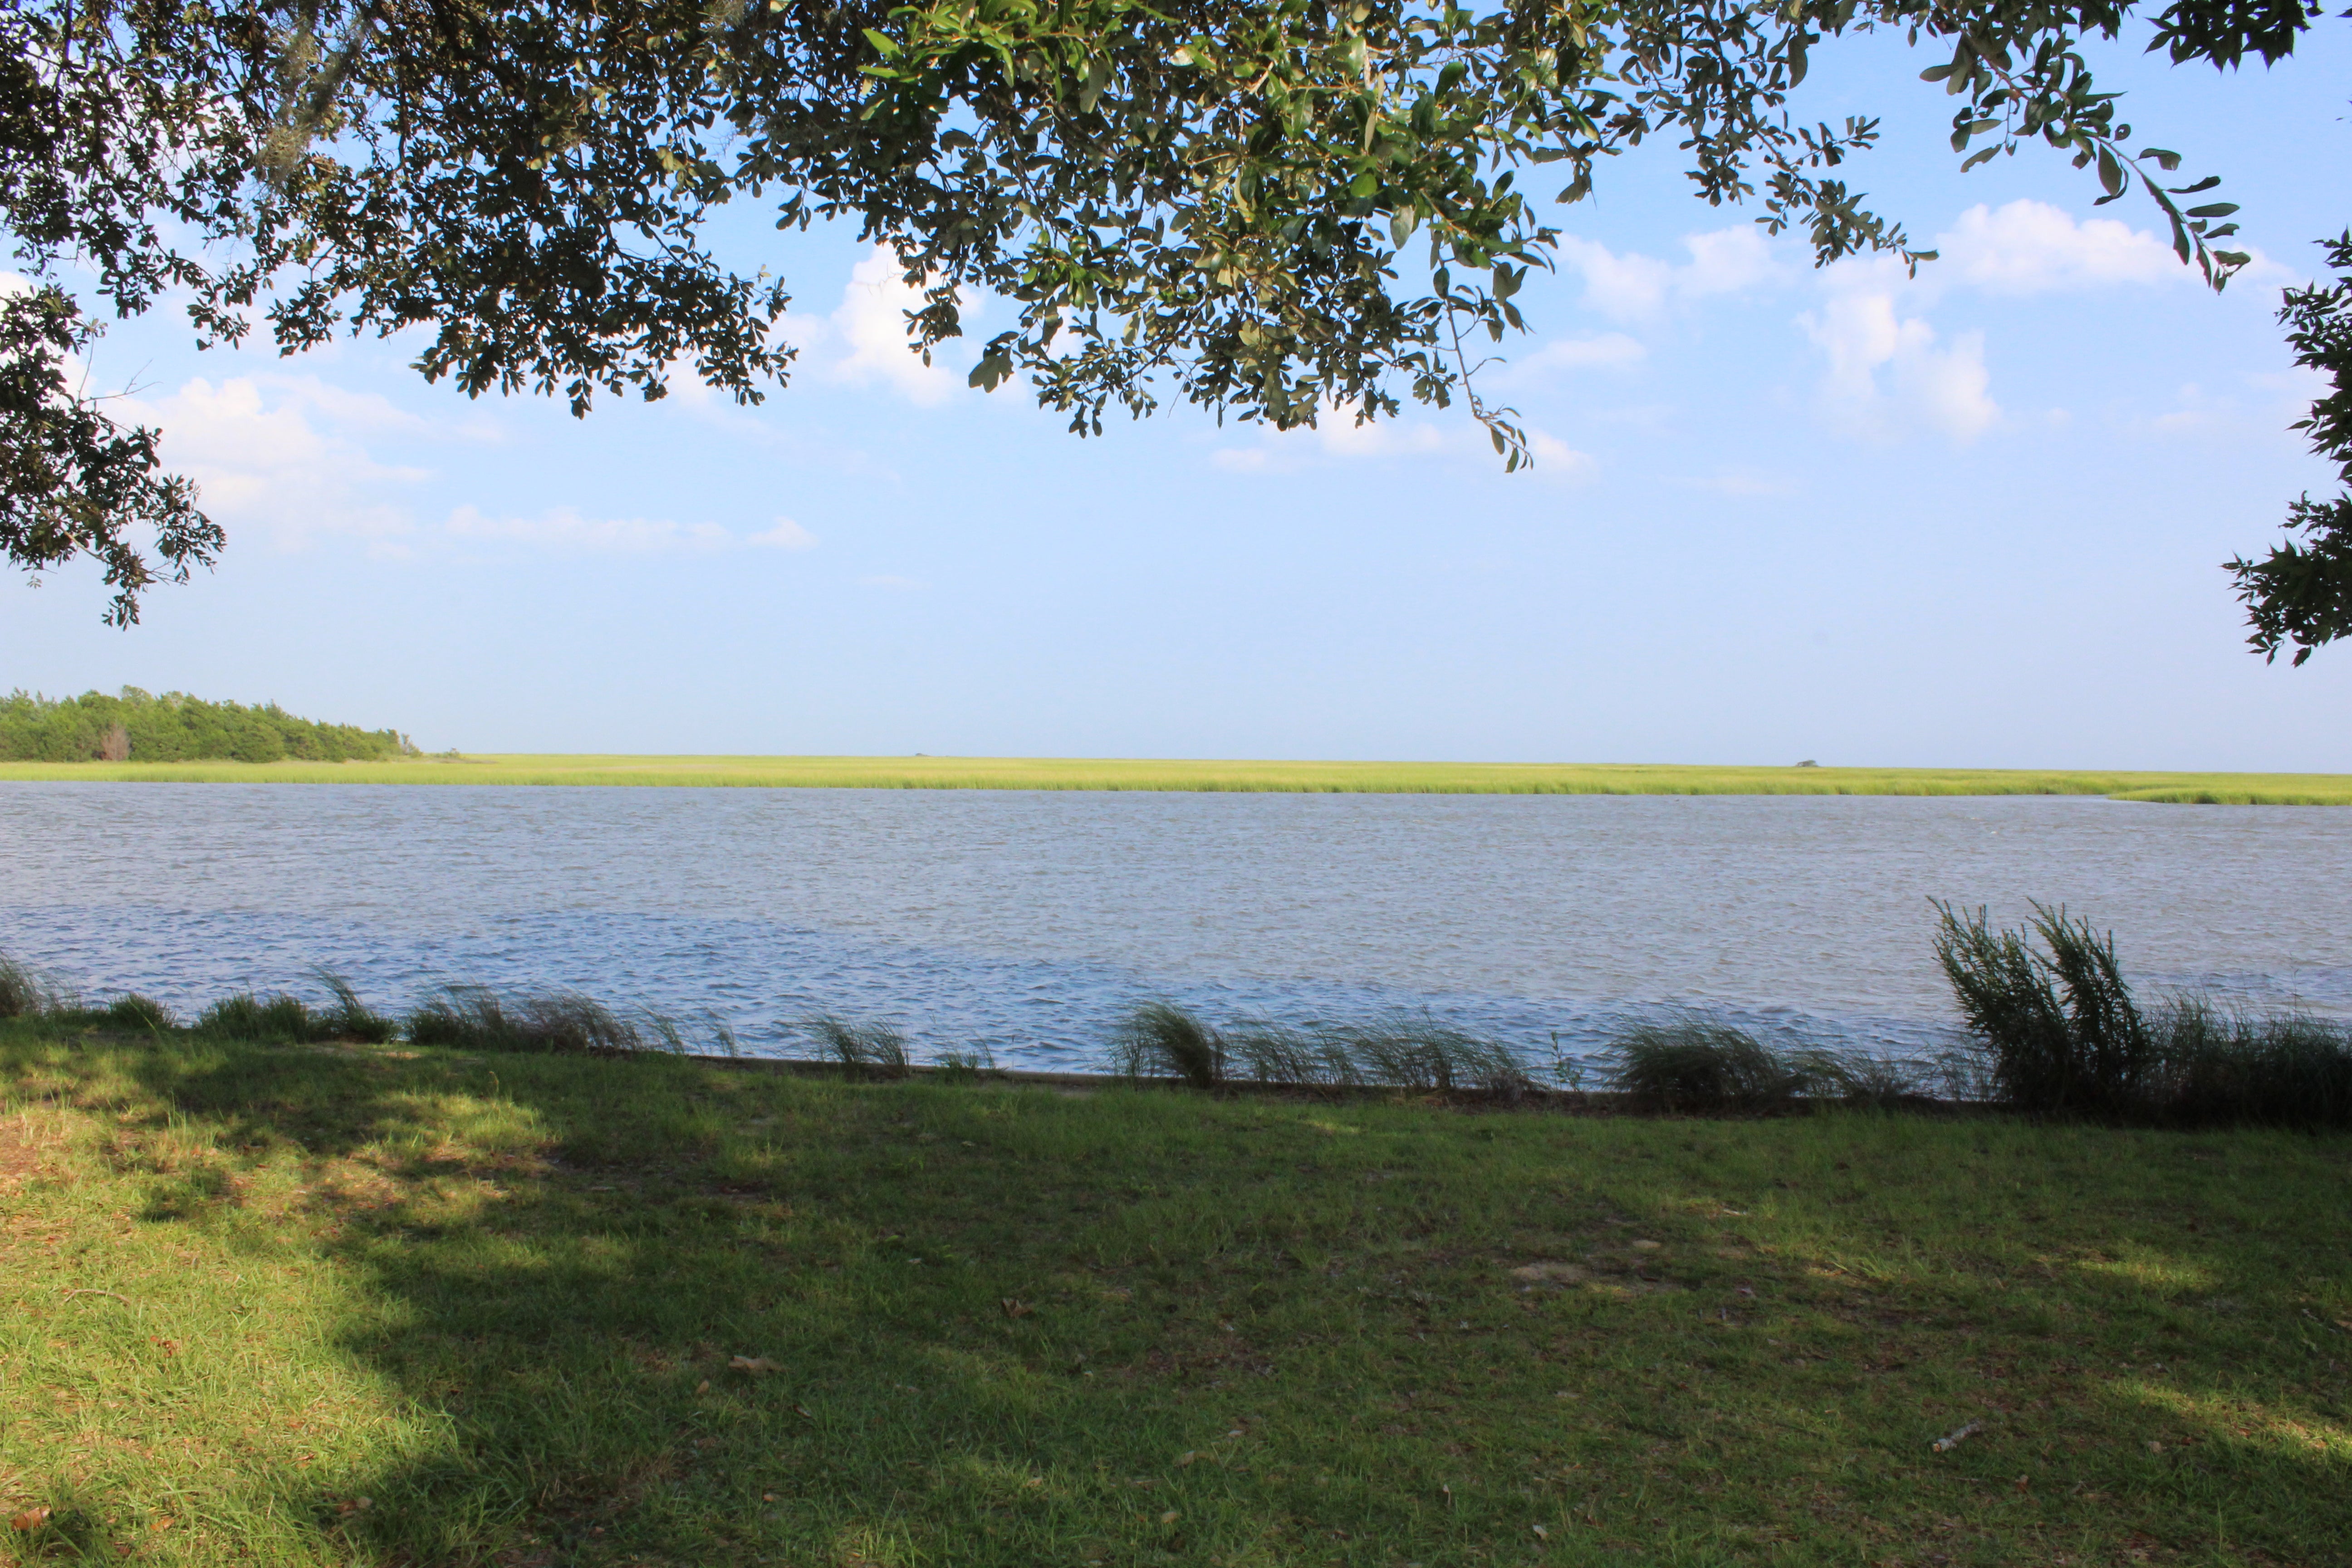 Campground view of the Intercoastal